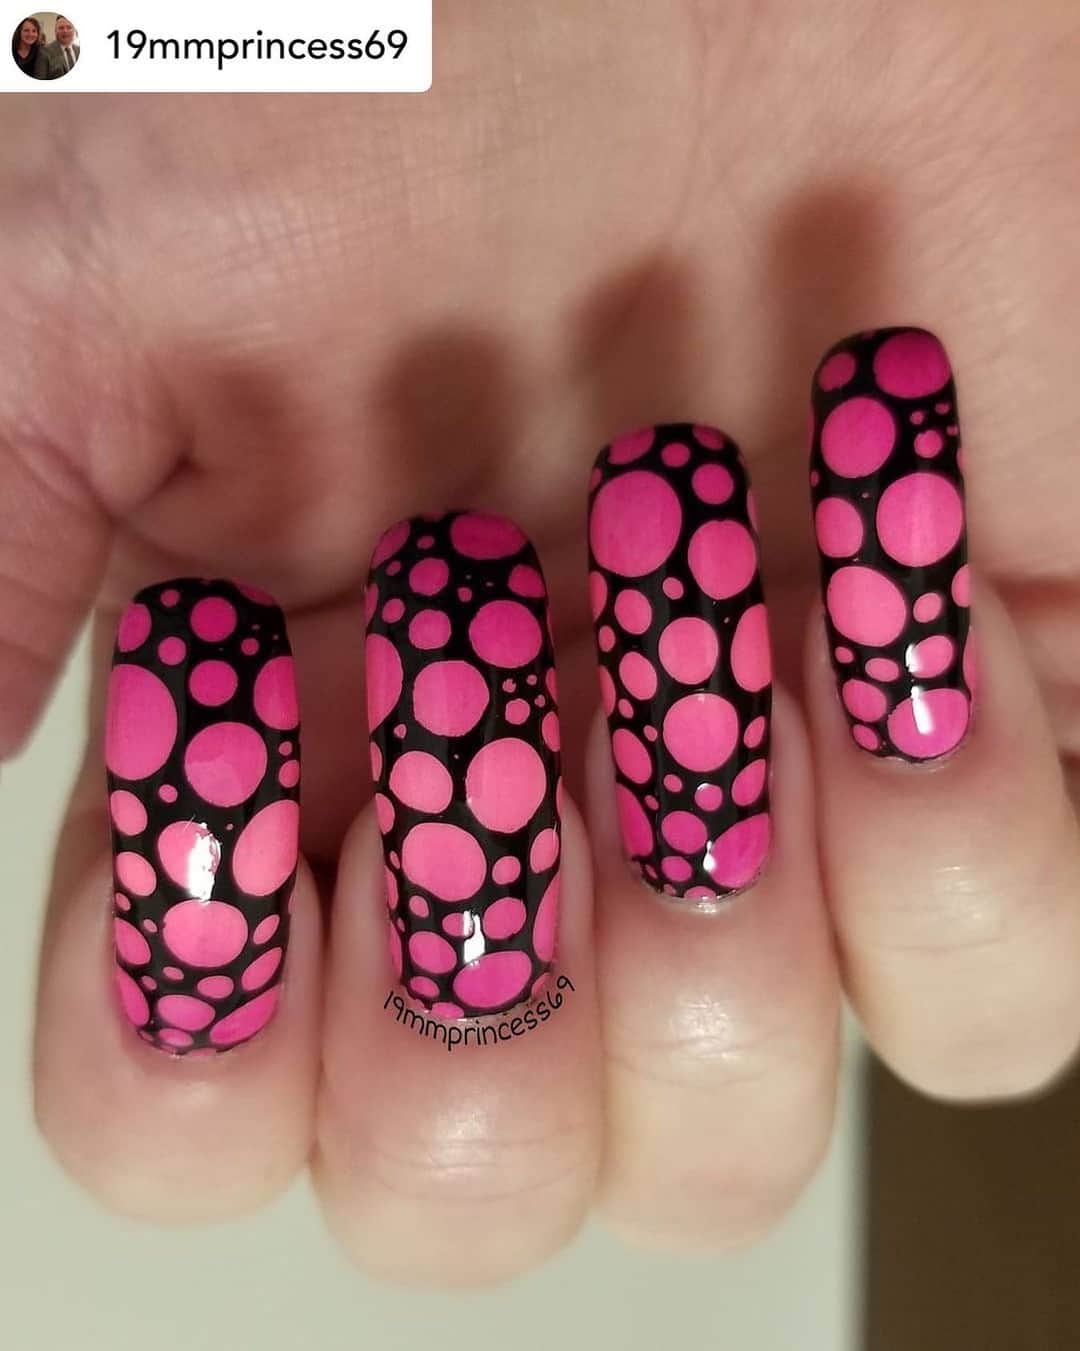 Nail Designsのインスタグラム：「Credit • @19mmprincess69 💖 Polka Dots 💖 @pink_wednailart Gradient is  Sittin Pretty,  Wrapped Around My Pink-y,  @salonperfect Stamped with As Black As Night @hit_the_bottle @beautometry  Plates- natural paradox @yourscosmetics Clear stamper @dewnailpolish Cuticle cover @ribbitsstickits Top coat @glistenandglow1  Acetone Additive and cuticle oil @unicornmagicskincare   💖💖💖💖 #mmprincessnails #nailswithigfriends  #hitthebottle  #beautometry #nailitdaily #notd #nails2inspire #nailsoftoday  #nailsofinstagram  #nailstagram #nailsofinsta #nailstampingaddict #stampednailaddict #stampednails #nailoftoday  #unicornmagicskincare  #nailartchallenge #nacentral  #nailartcentral  #nailartcollab  #nailspafeature  #nailstampingsisterhood #pinkwednesday  #pinknails💅  #pinknails #misschopinkthemewed  #salonperfect #polkadotnails #polkadots」